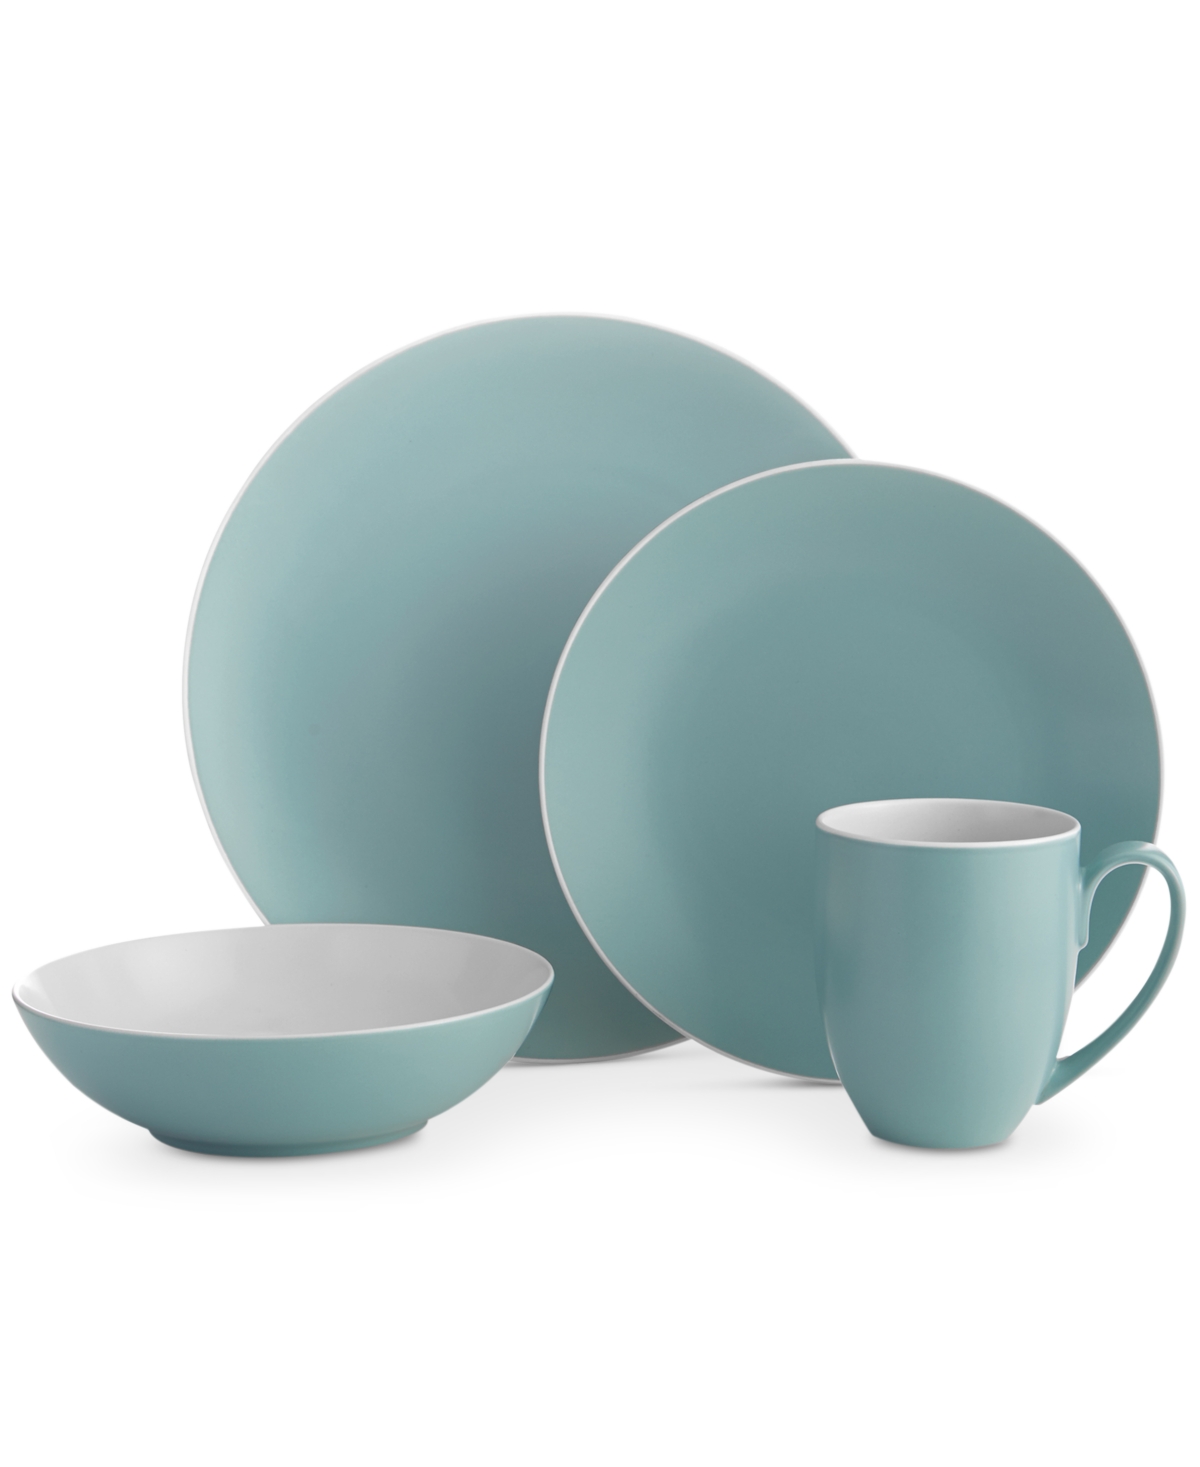 Pop Collection by Robin Levien 4-Piece Place Setting - Chalk